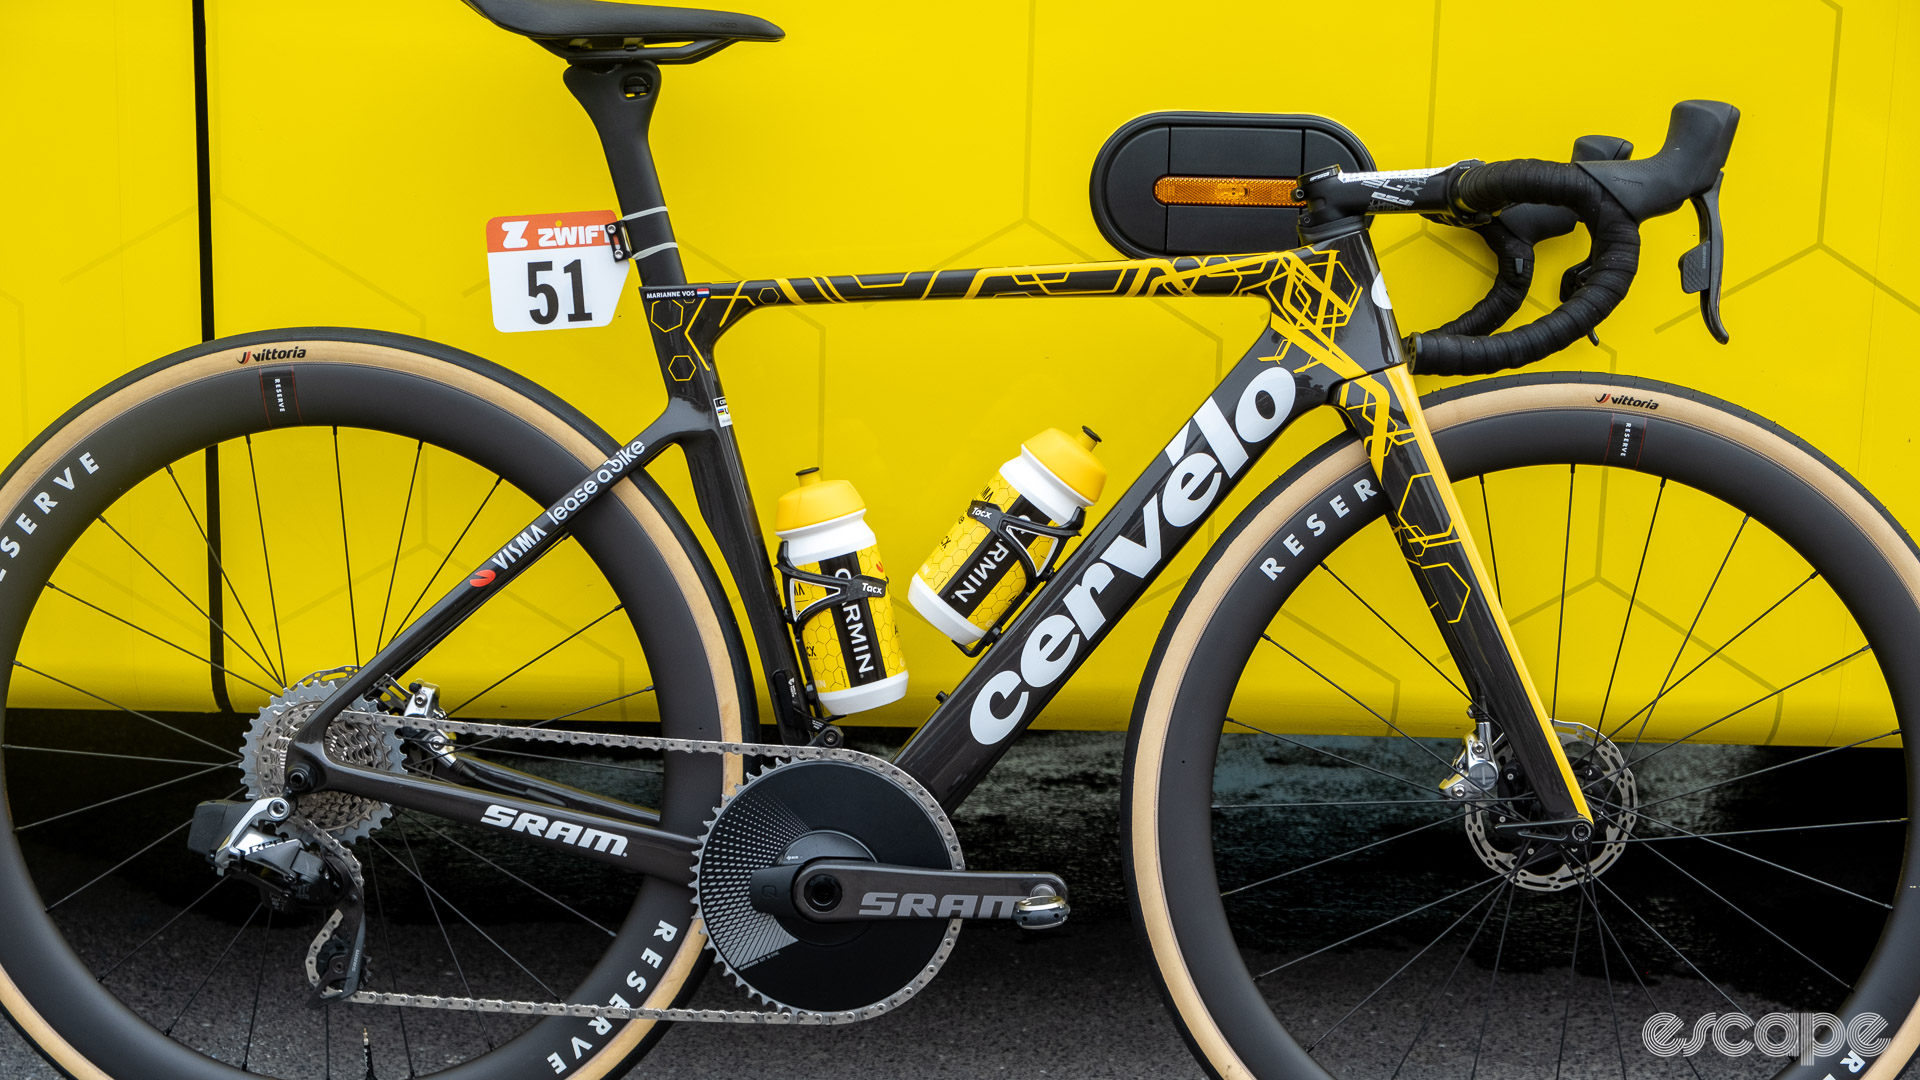 The image shows Marianne Vos' Cervelo Soloist.